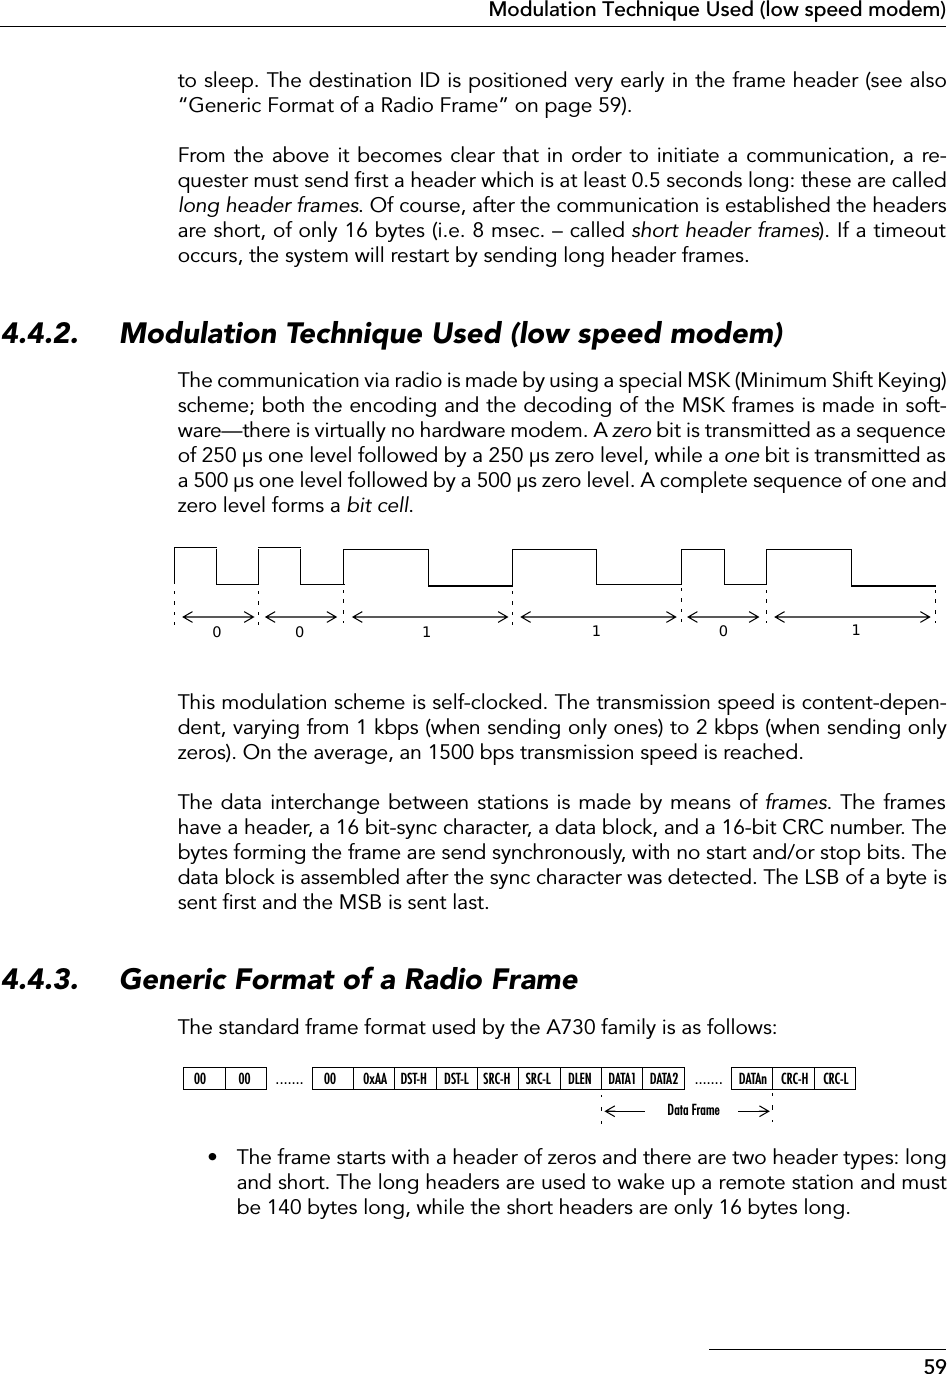 59Modulation Technique Used (low speed modem)to sleep. The destination ID is positioned very early in the frame header (see also“Generic Format of a Radio Frame” on page 59).From the above it becomes clear that in order to initiate a communication, a re-quester must send ﬁrst a header which is at least 0.5 seconds long: these are calledlong header frames. Of course, after the communication is established the headersare short, of only 16 bytes (i.e. 8 msec. – called short header frames). If a timeoutoccurs, the system will restart by sending long header frames.4.4.2. Modulation Technique Used (low speed modem)The communication via radio is made by using a special MSK (Minimum Shift Keying)scheme; both the encoding and the decoding of the MSK frames is made in soft-ware—there is virtually no hardware modem. A zero bit is transmitted as a sequenceof 250 µs one level followed by a 250 µs zero level, while a one bit is transmitted asa 500 µs one level followed by a 500 µs zero level. A complete sequence of one andzero level forms a bit cell.This modulation scheme is self-clocked. The transmission speed is content-depen-dent, varying from 1 kbps (when sending only ones) to 2 kbps (when sending onlyzeros). On the average, an 1500 bps transmission speed is reached.The data interchange between stations is made by means of frames. The frameshave a header, a 16 bit-sync character, a data block, and a 16-bit CRC number. Thebytes forming the frame are send synchronously, with no start and/or stop bits. Thedata block is assembled after the sync character was detected. The LSB of a byte issent ﬁrst and the MSB is sent last.4.4.3. Generic Format of a Radio FrameThe standard frame format used by the A730 family is as follows:• The frame starts with a header of zeros and there are two header types: longand short. The long headers are used to wake up a remote station and mustbe 140 bytes long, while the short headers are only 16 bytes long.00 011100 00 ....... 00 0xAA DST-H DST-L SRC-H SRC-L DLEN .......DATA1 DATA2 DATAn CRC-H CRC-LData Frame